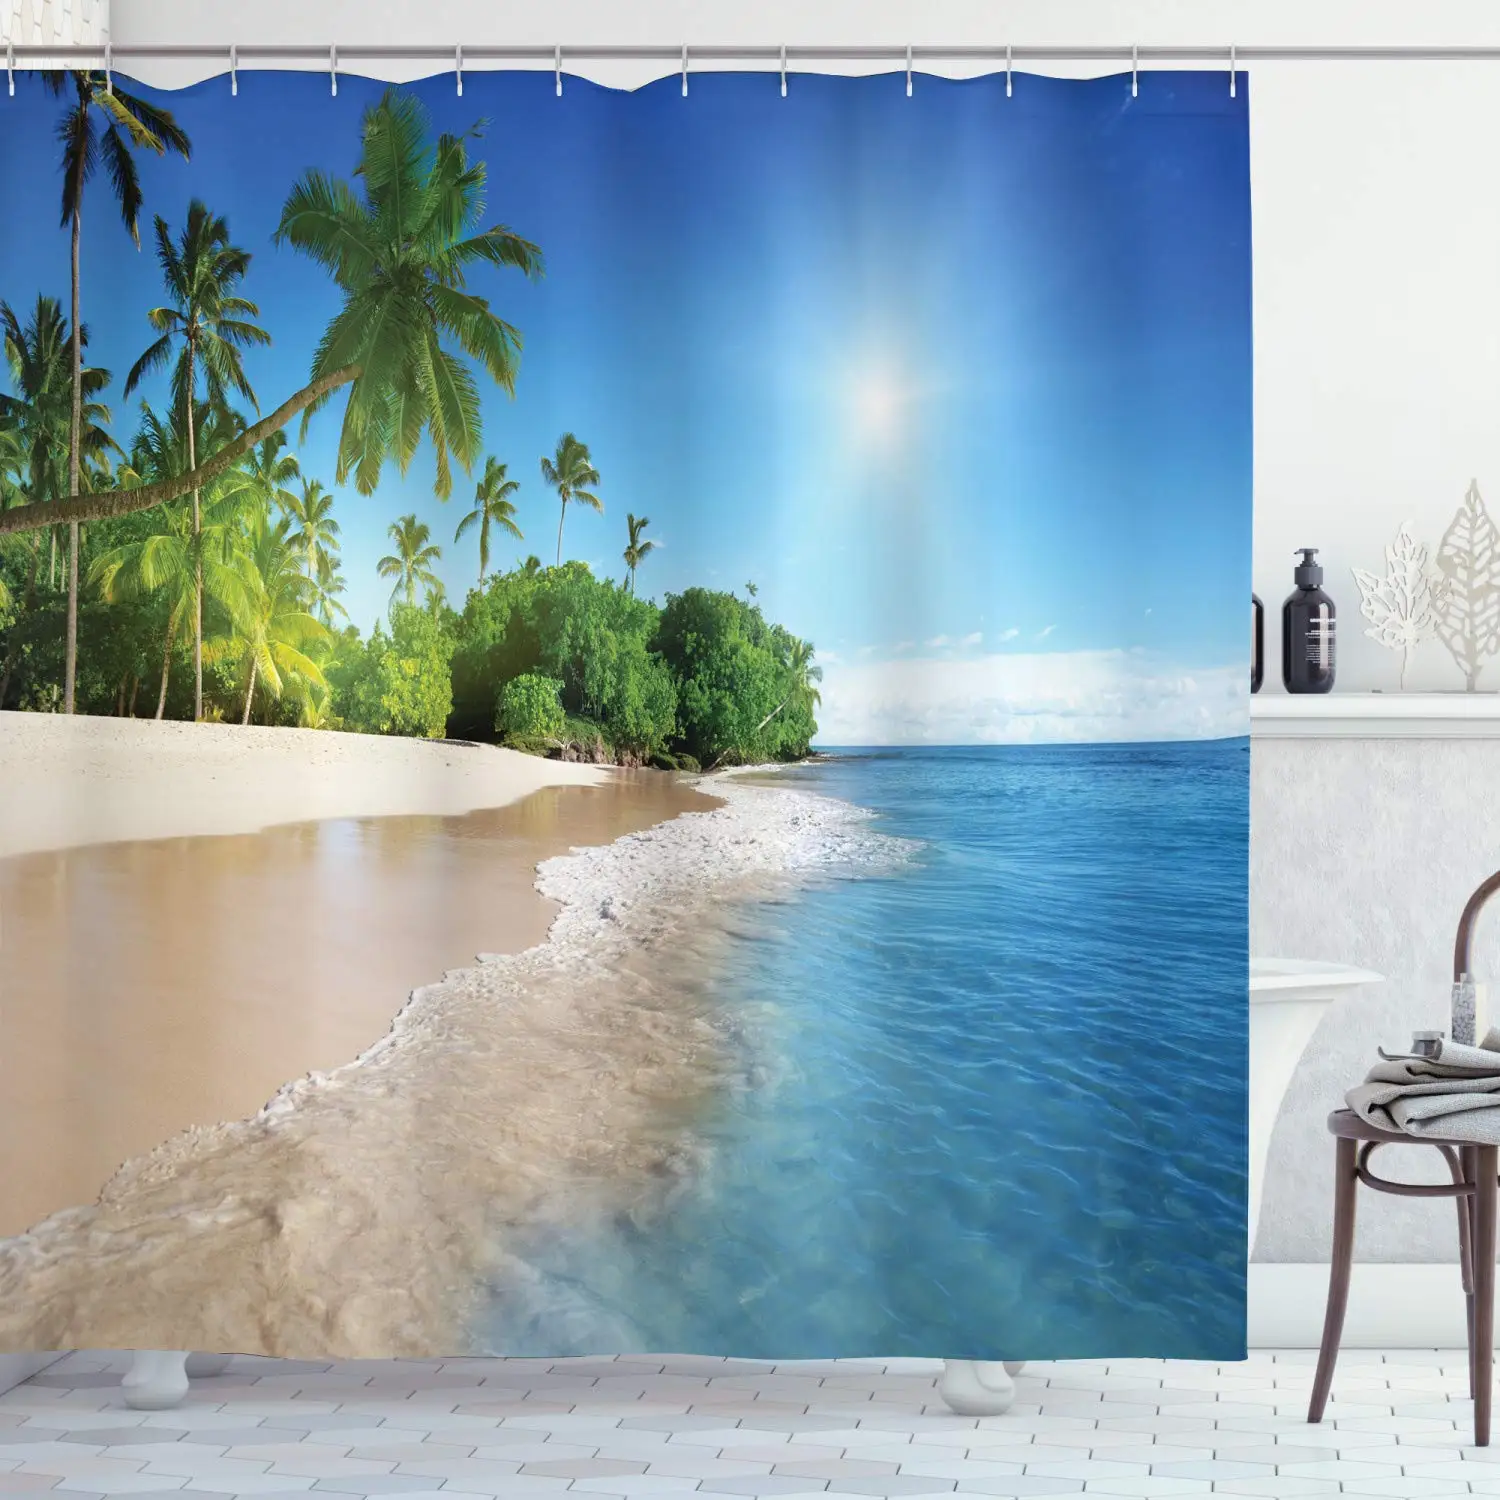 

Blue Shower Curtain Ocean Tropical Palm Trees on Sunny Island Beach Scene Panoramic View Picture Bathroom Decor Set